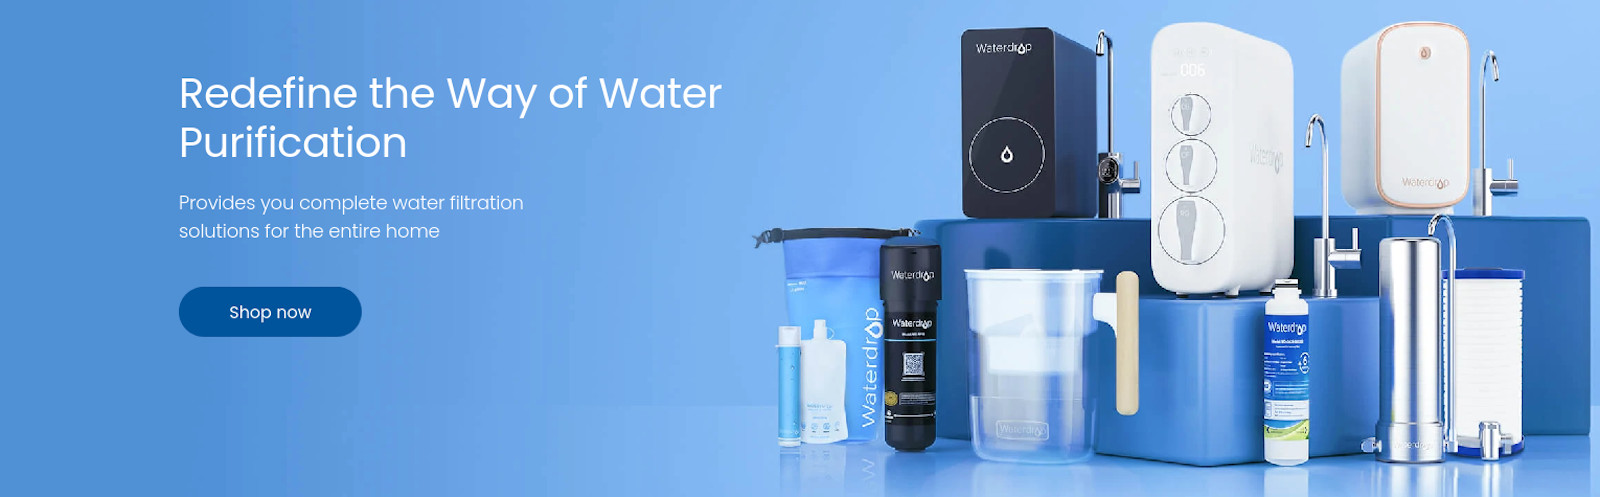 complete water filtration solutions budget price